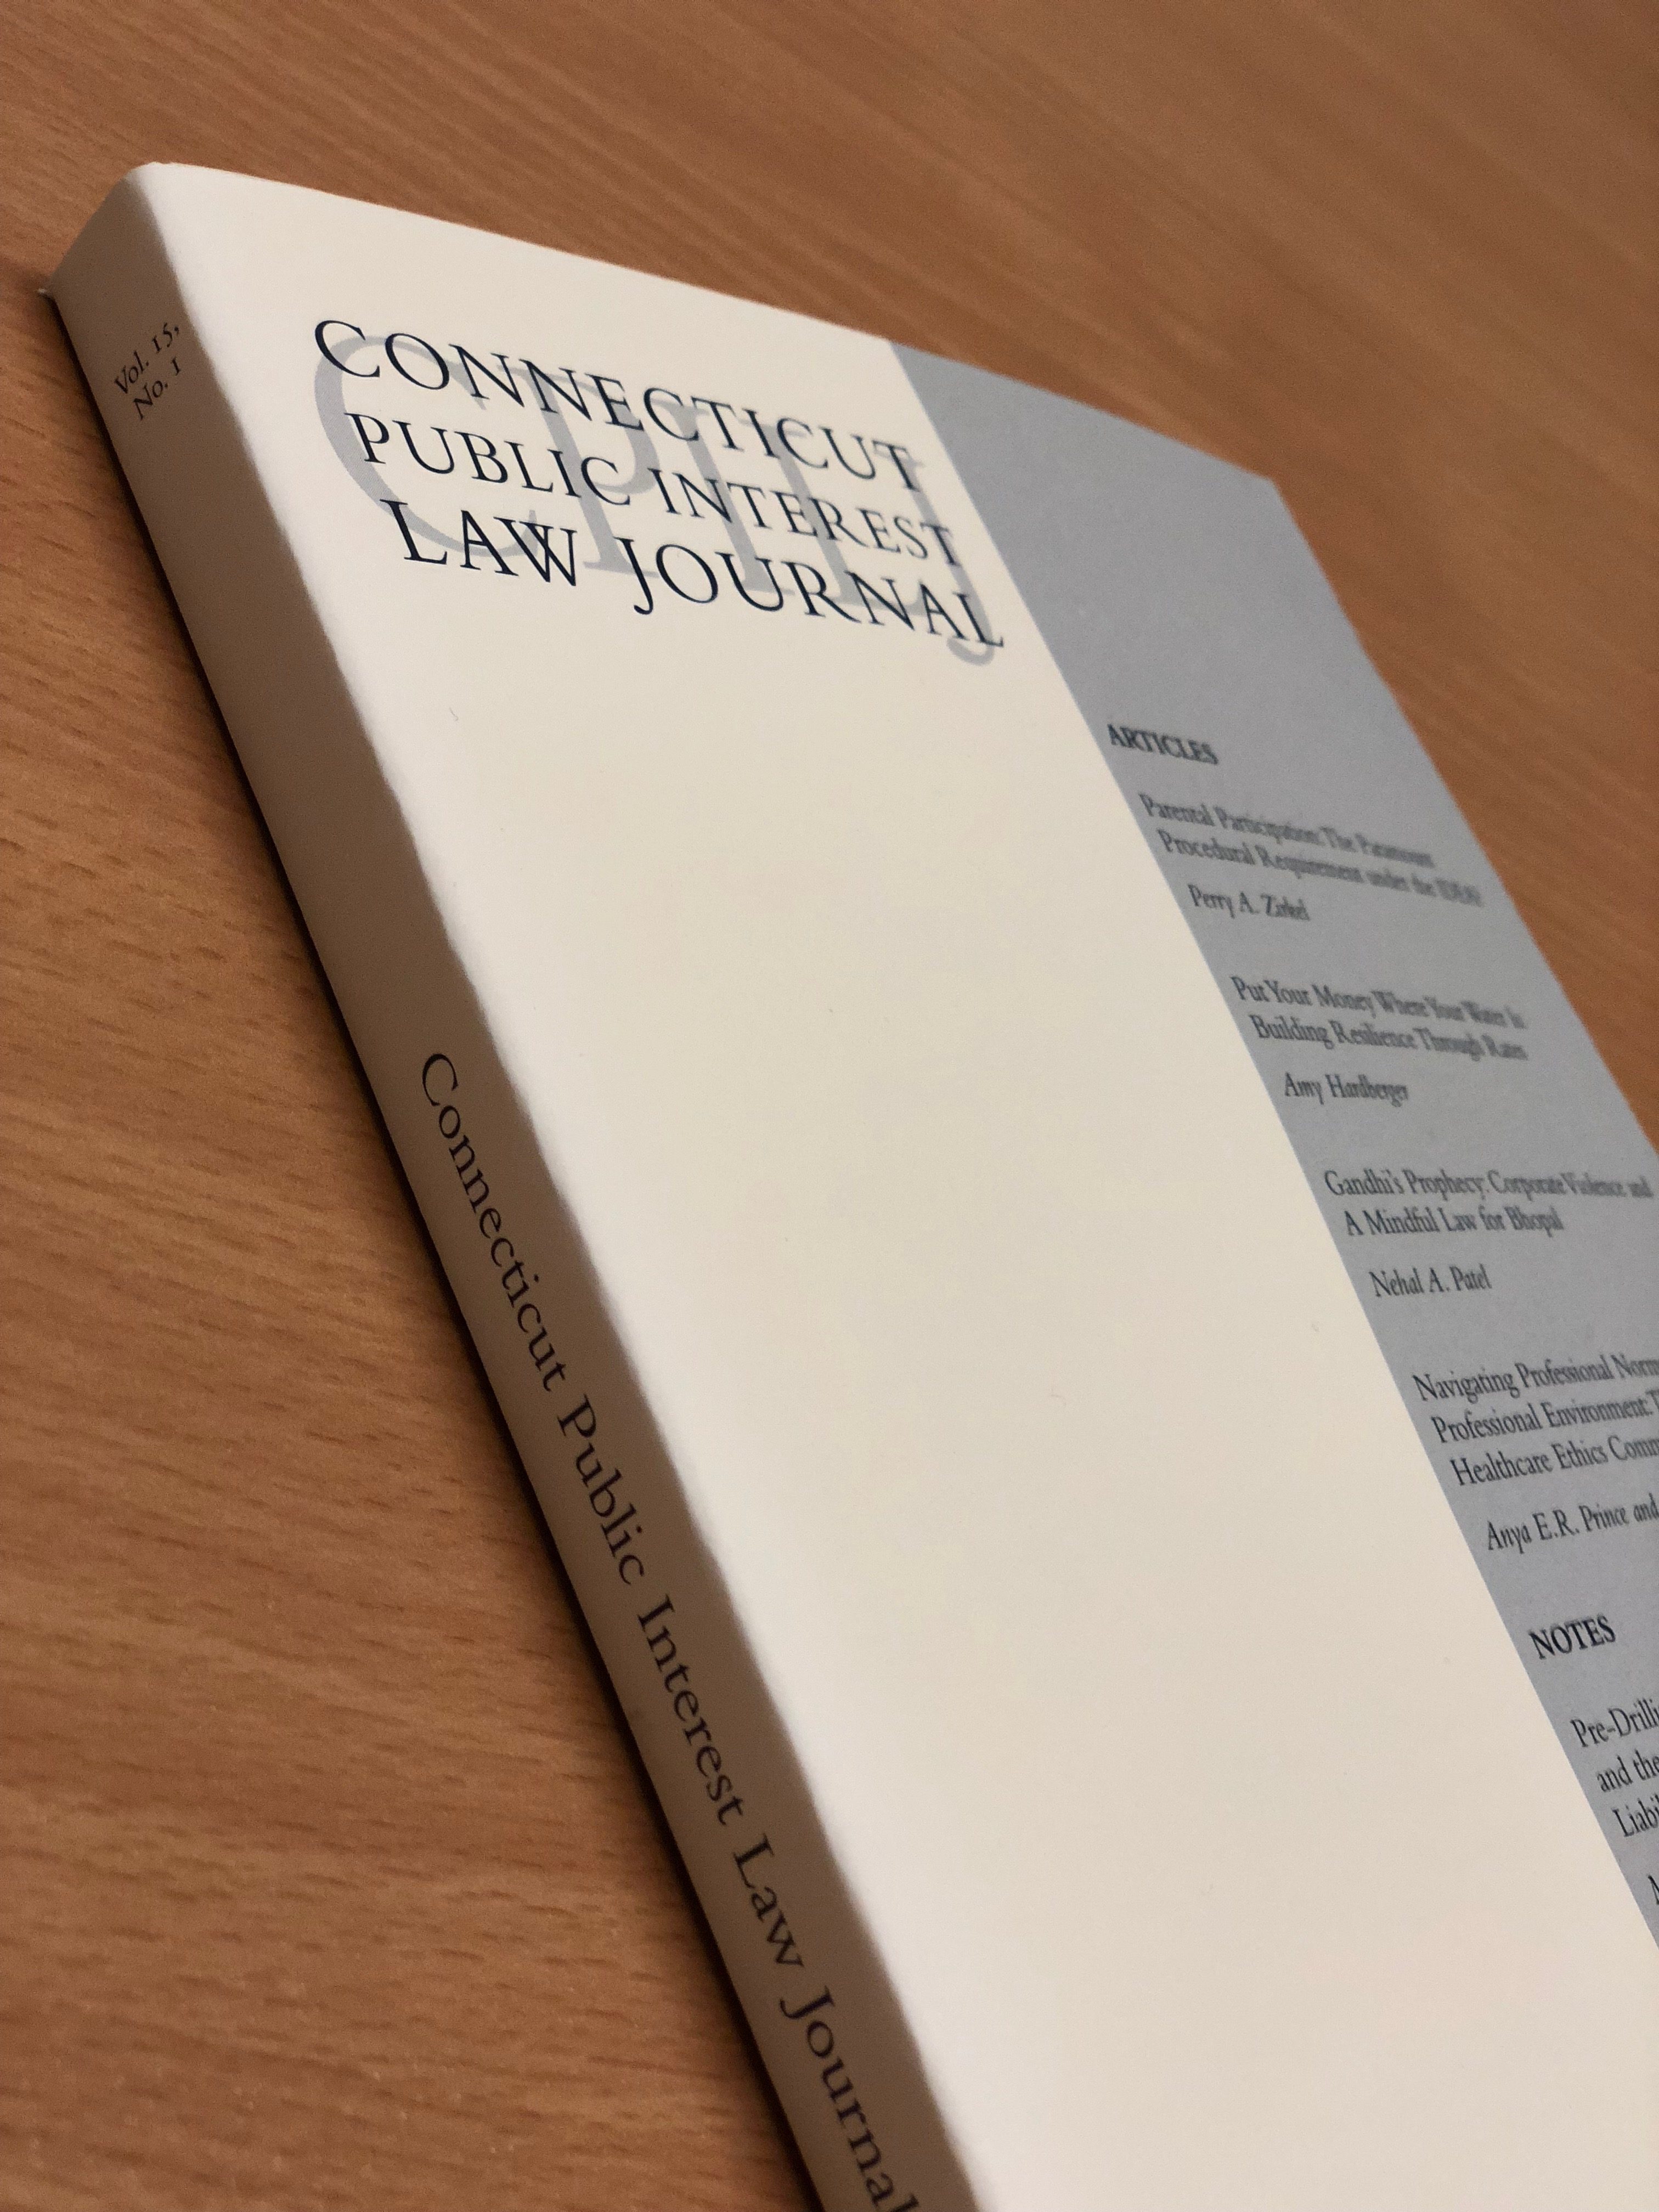 Image of printed Connecticut Public Interest Law Journal